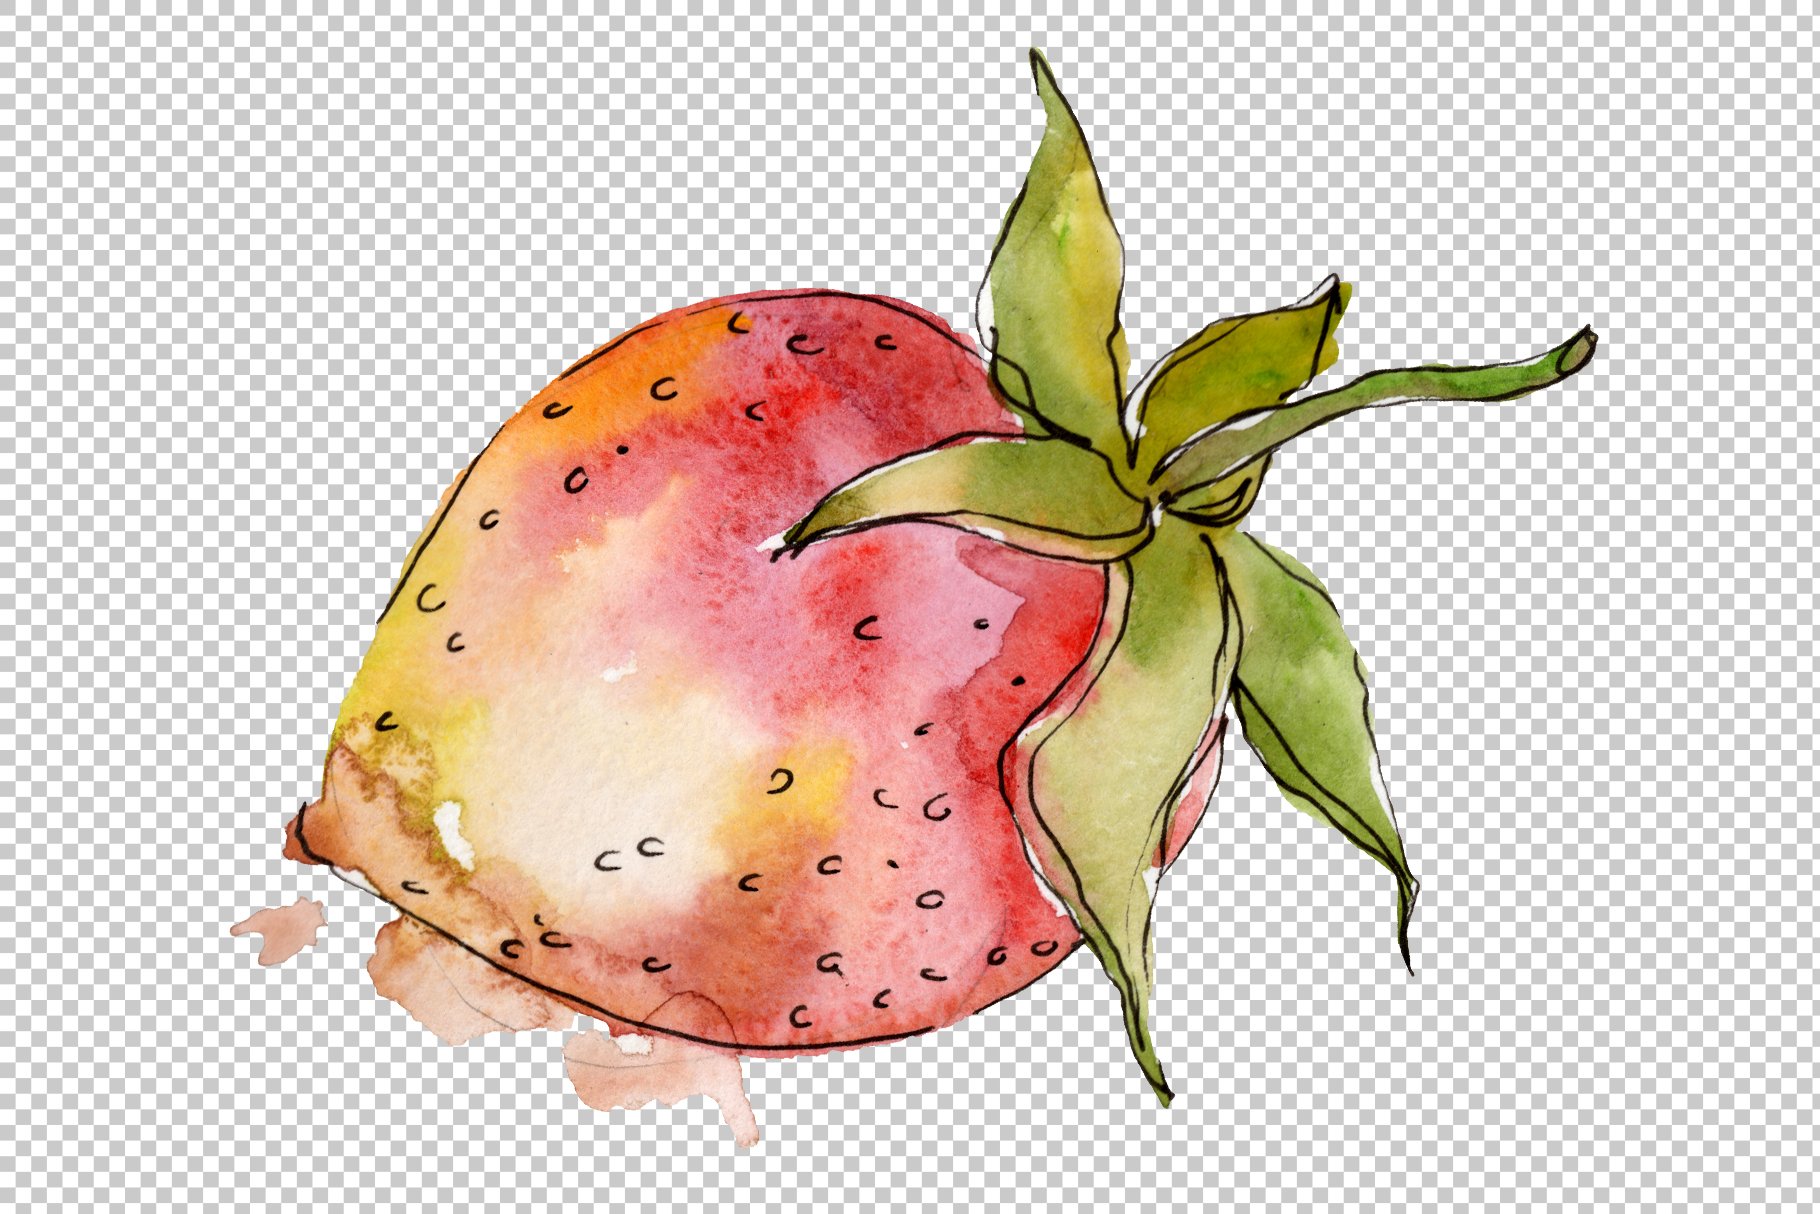 Watercolor old strawberry.